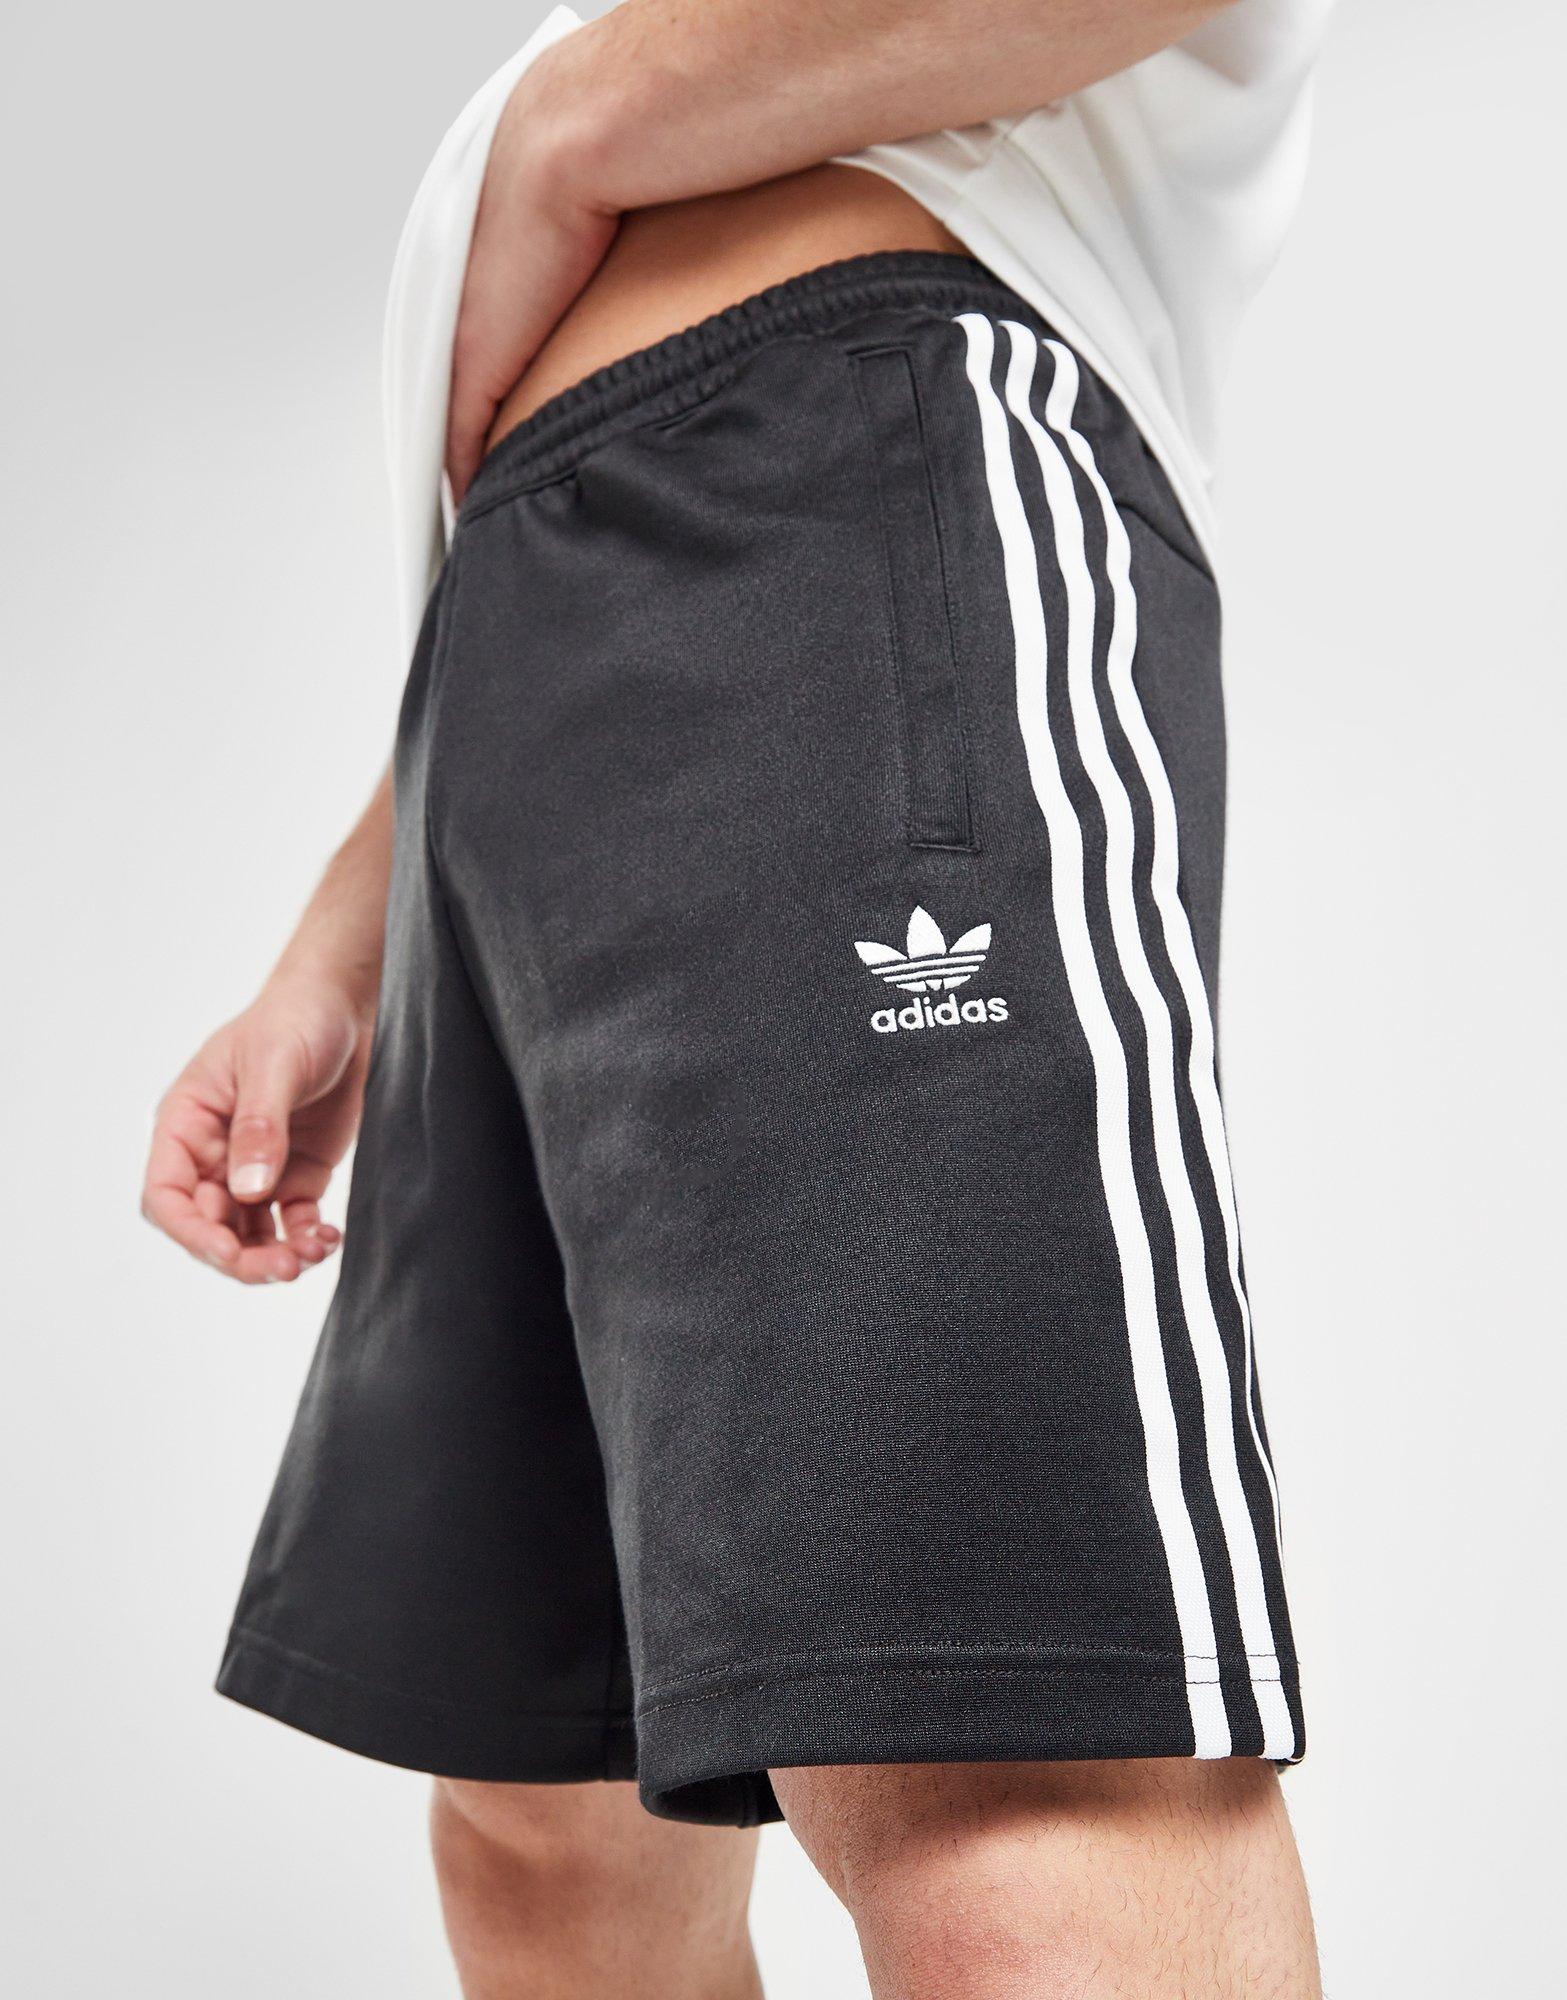 frequently Business description Applied adidas Originals SS Pantaloncini in Nero | JD Sports